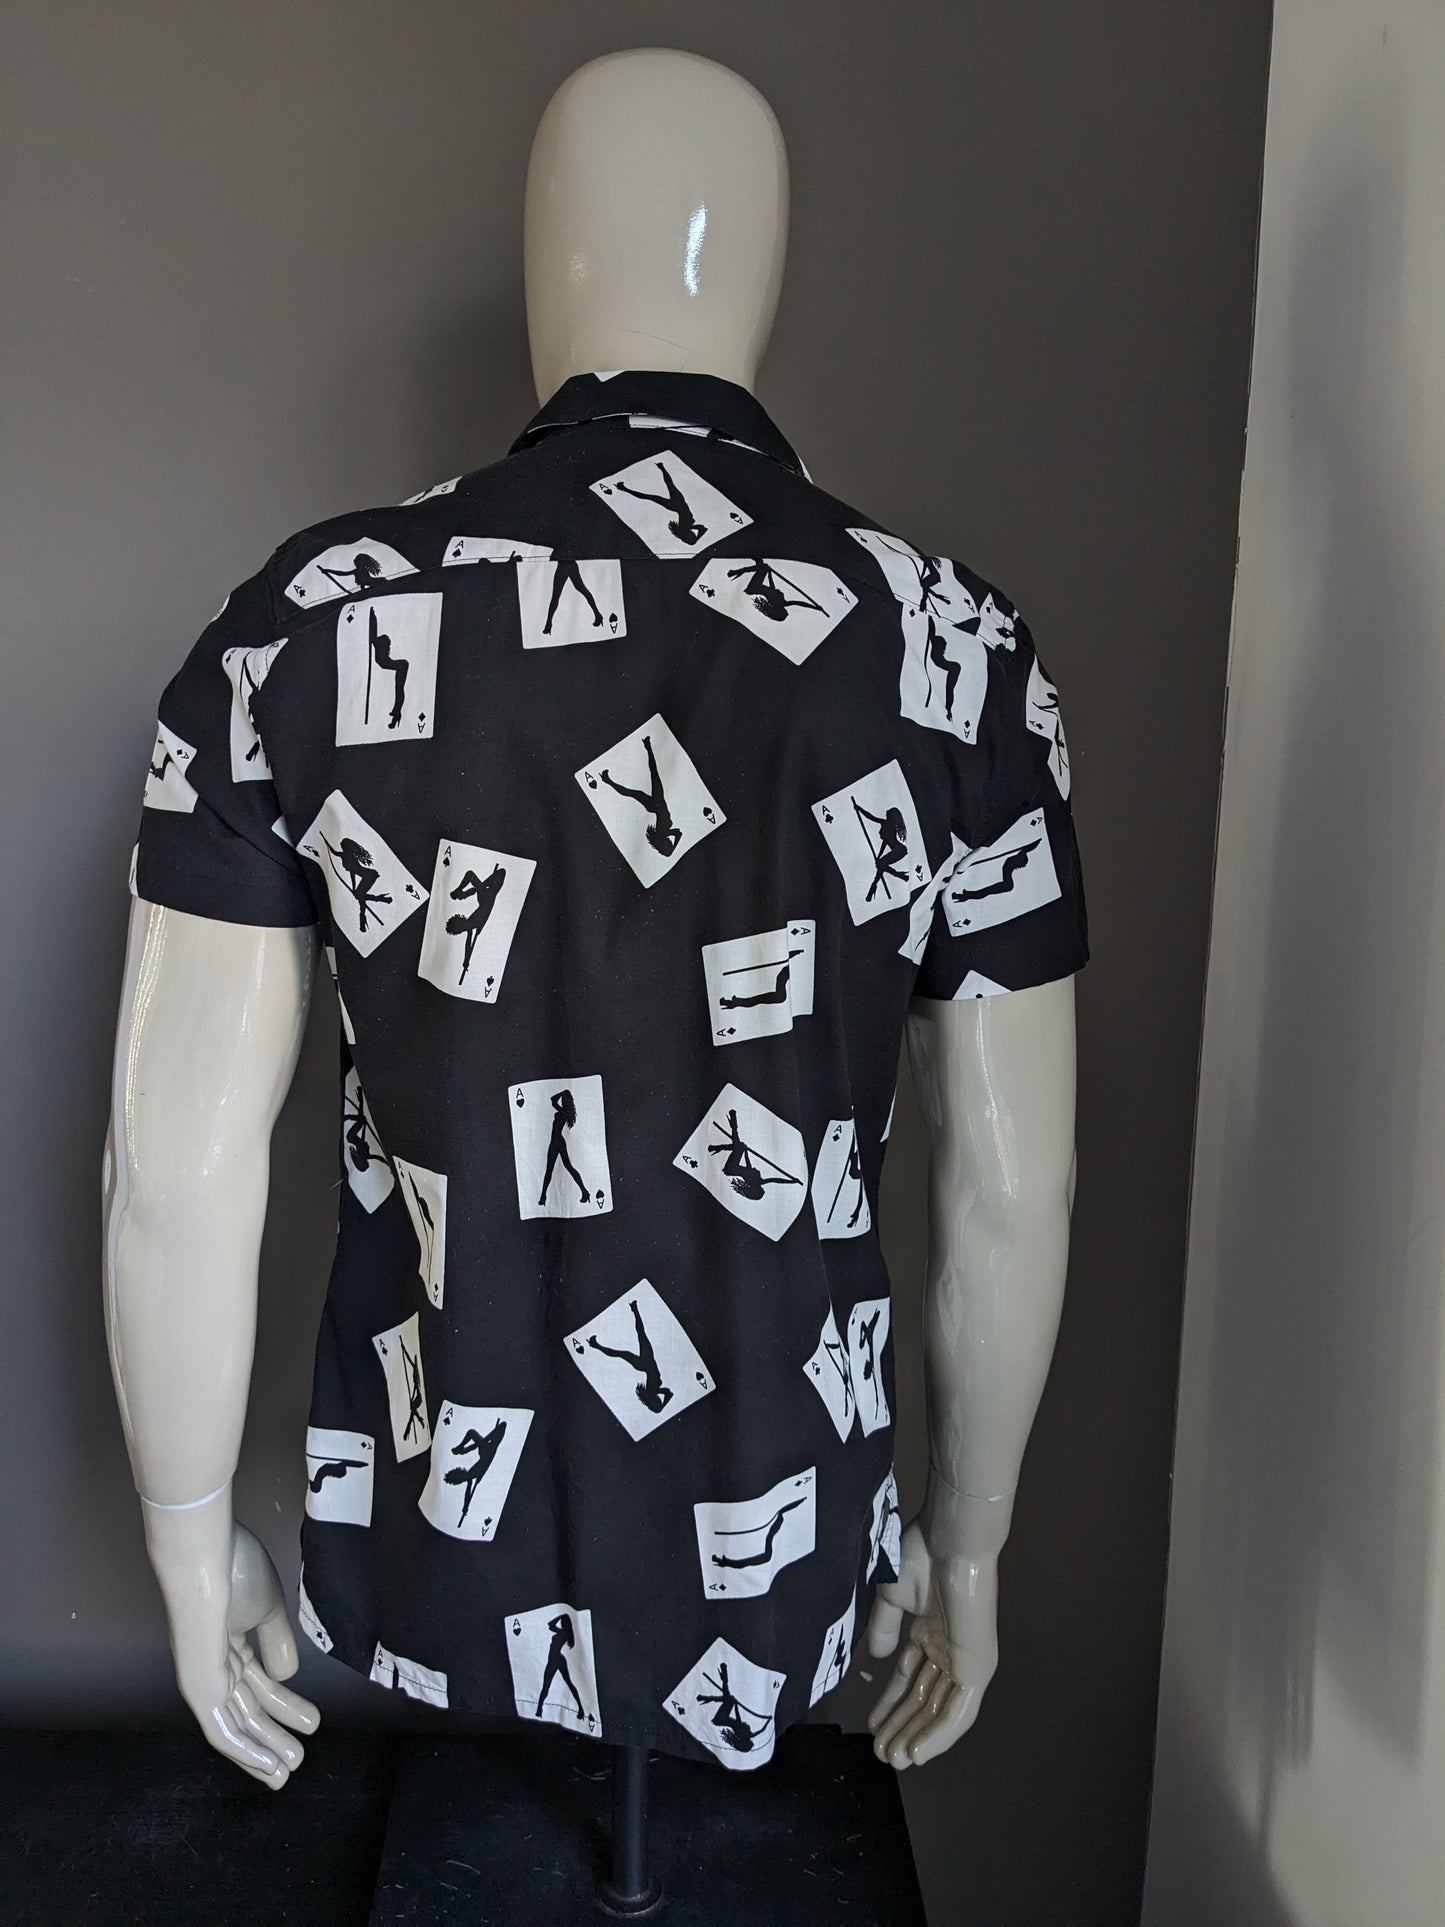 Fsbn shirt short sleeve. Black and white pin-up card print. Size M. Regular Fit.